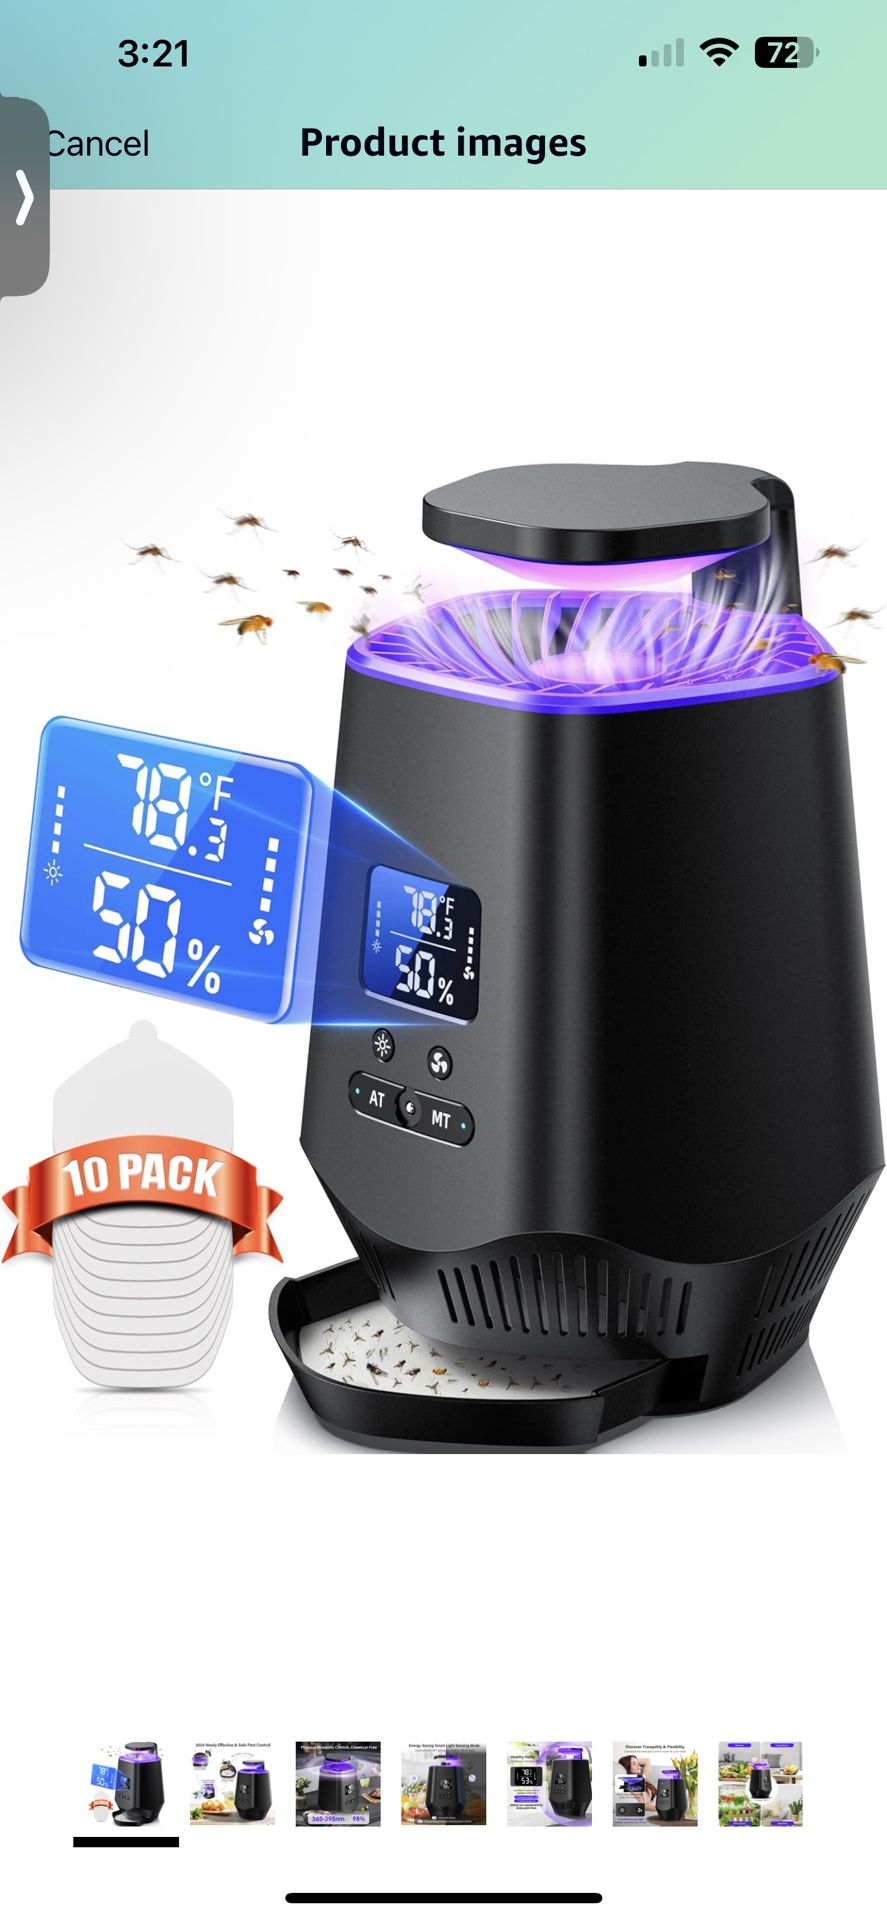 Fruit Fly Traps for Indoors, Smart Flying Insect Trap with Temperature and Humidity Sensor, Bug Catcher Ligth for Home House Plants Gnats Moths Mosqui